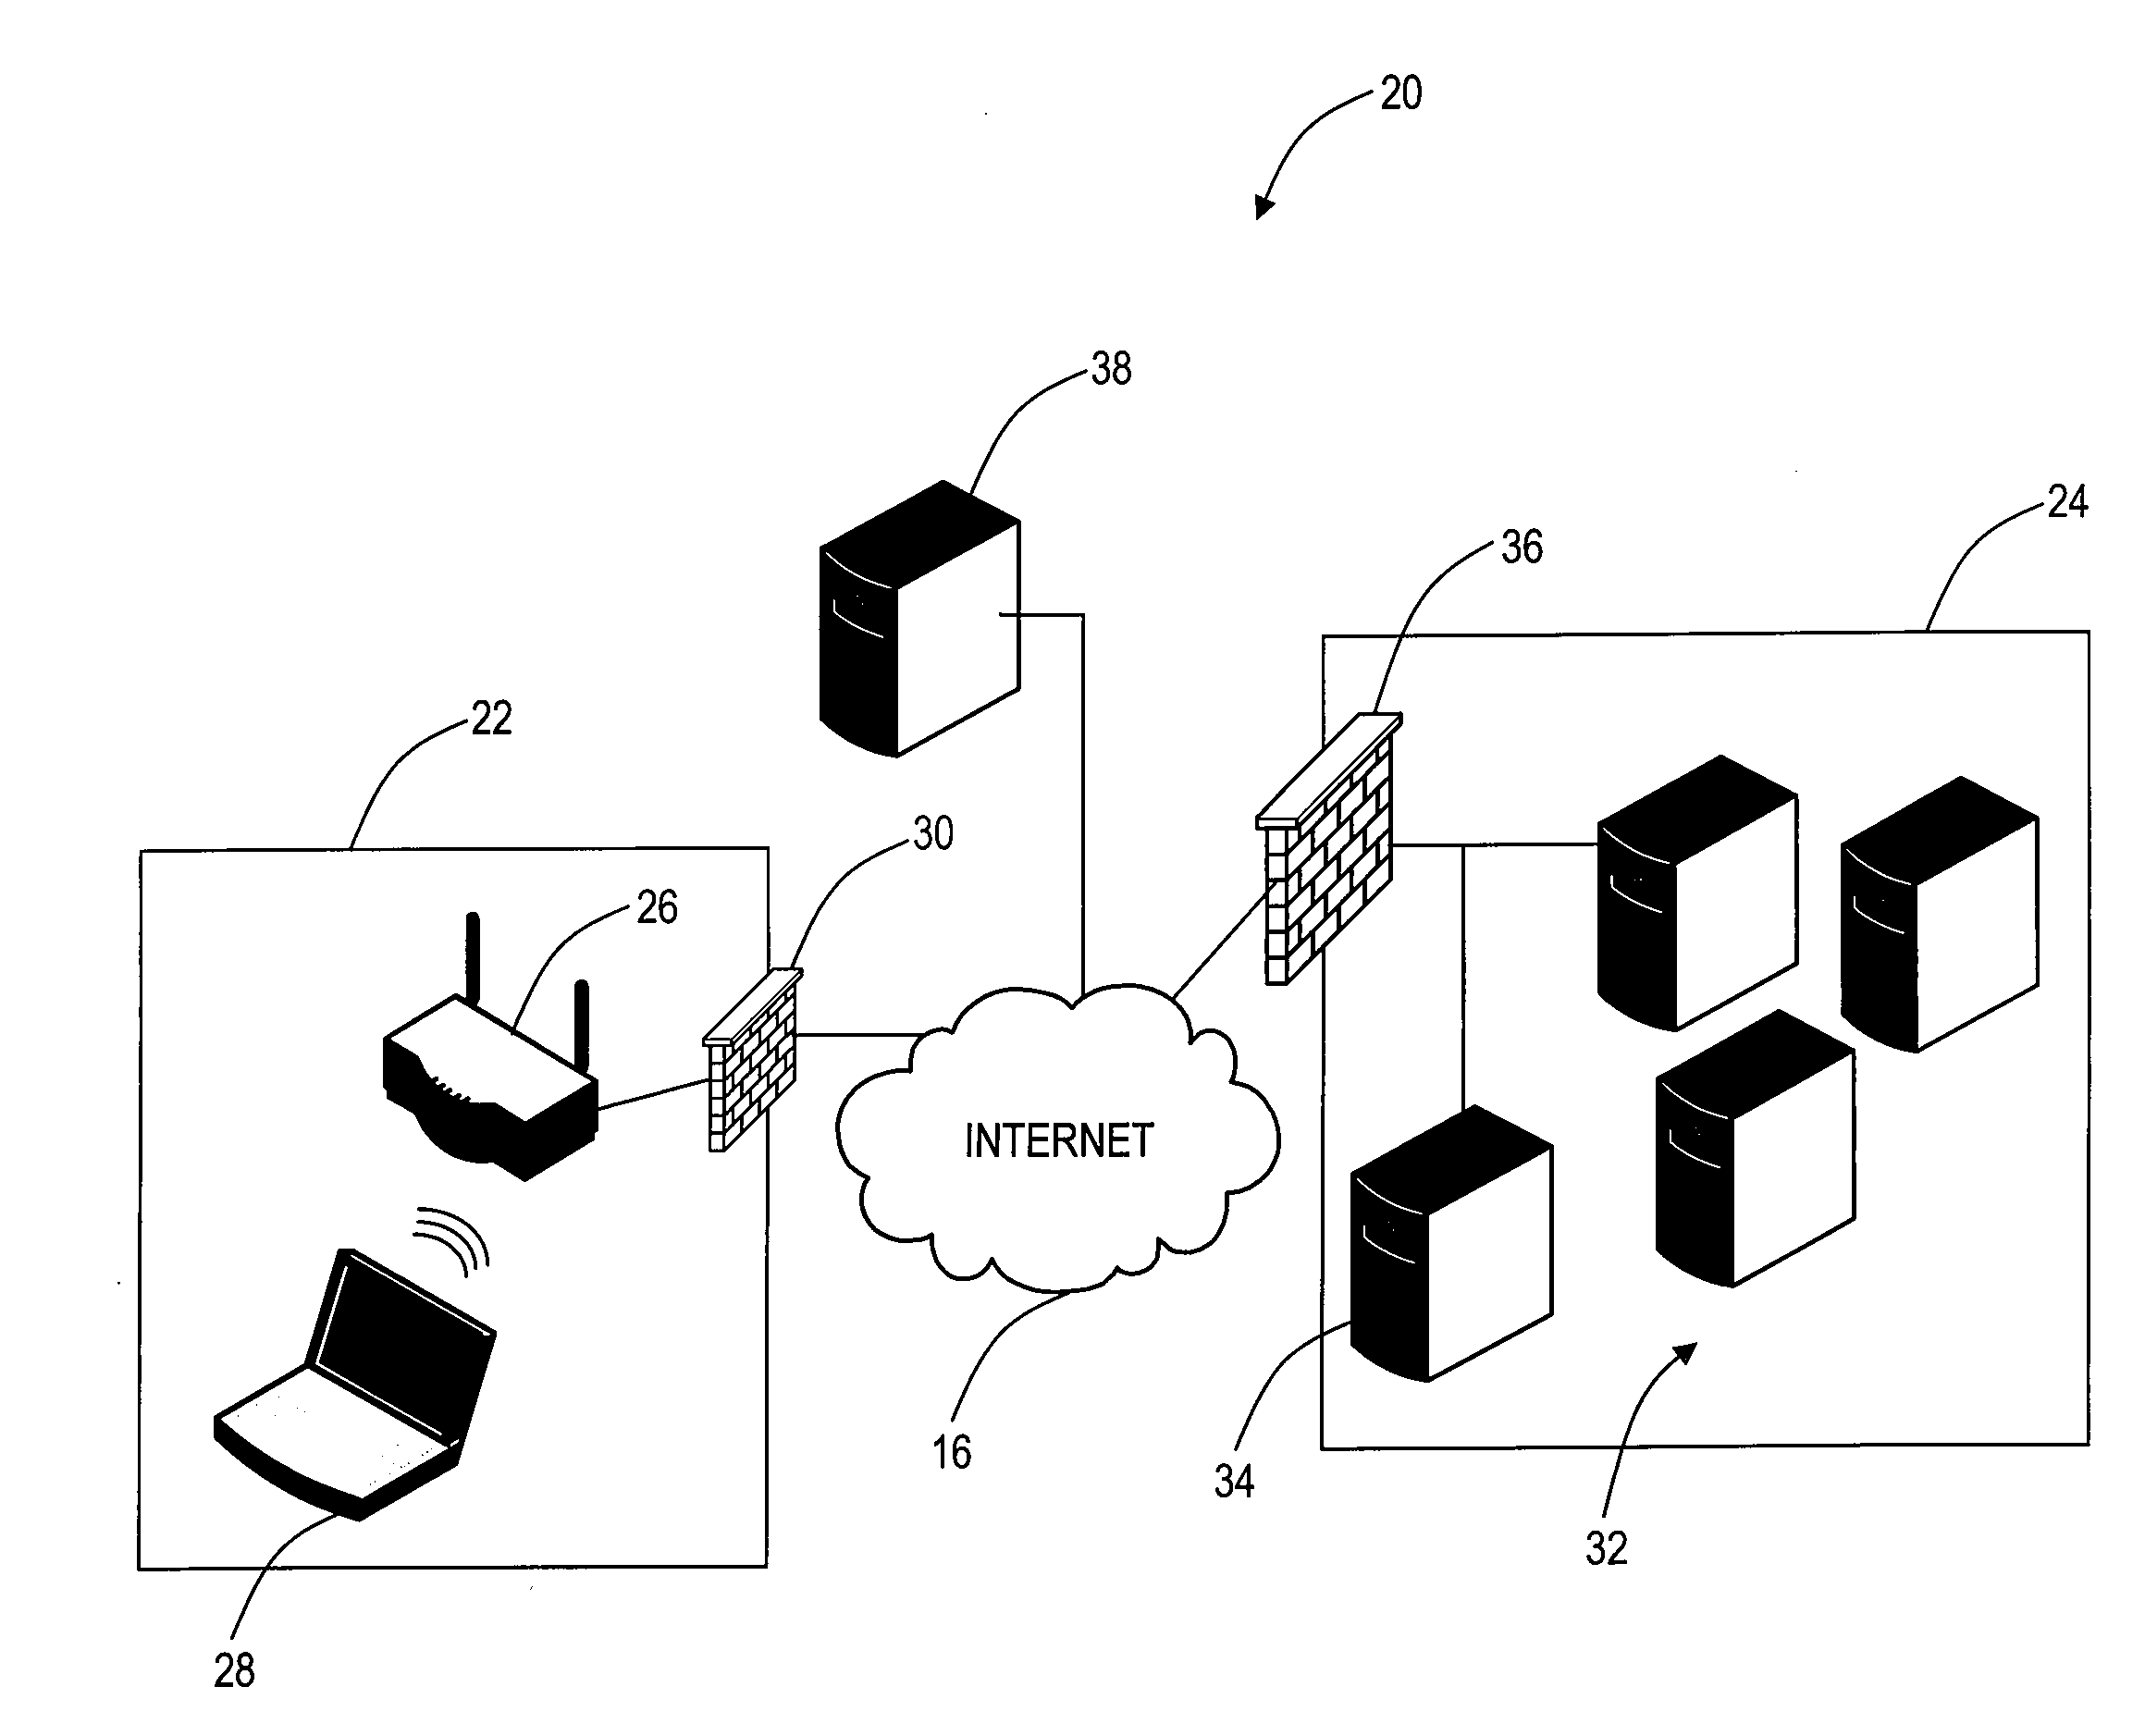 Systems and methods for secure access to remote networks utilizing wireless networks